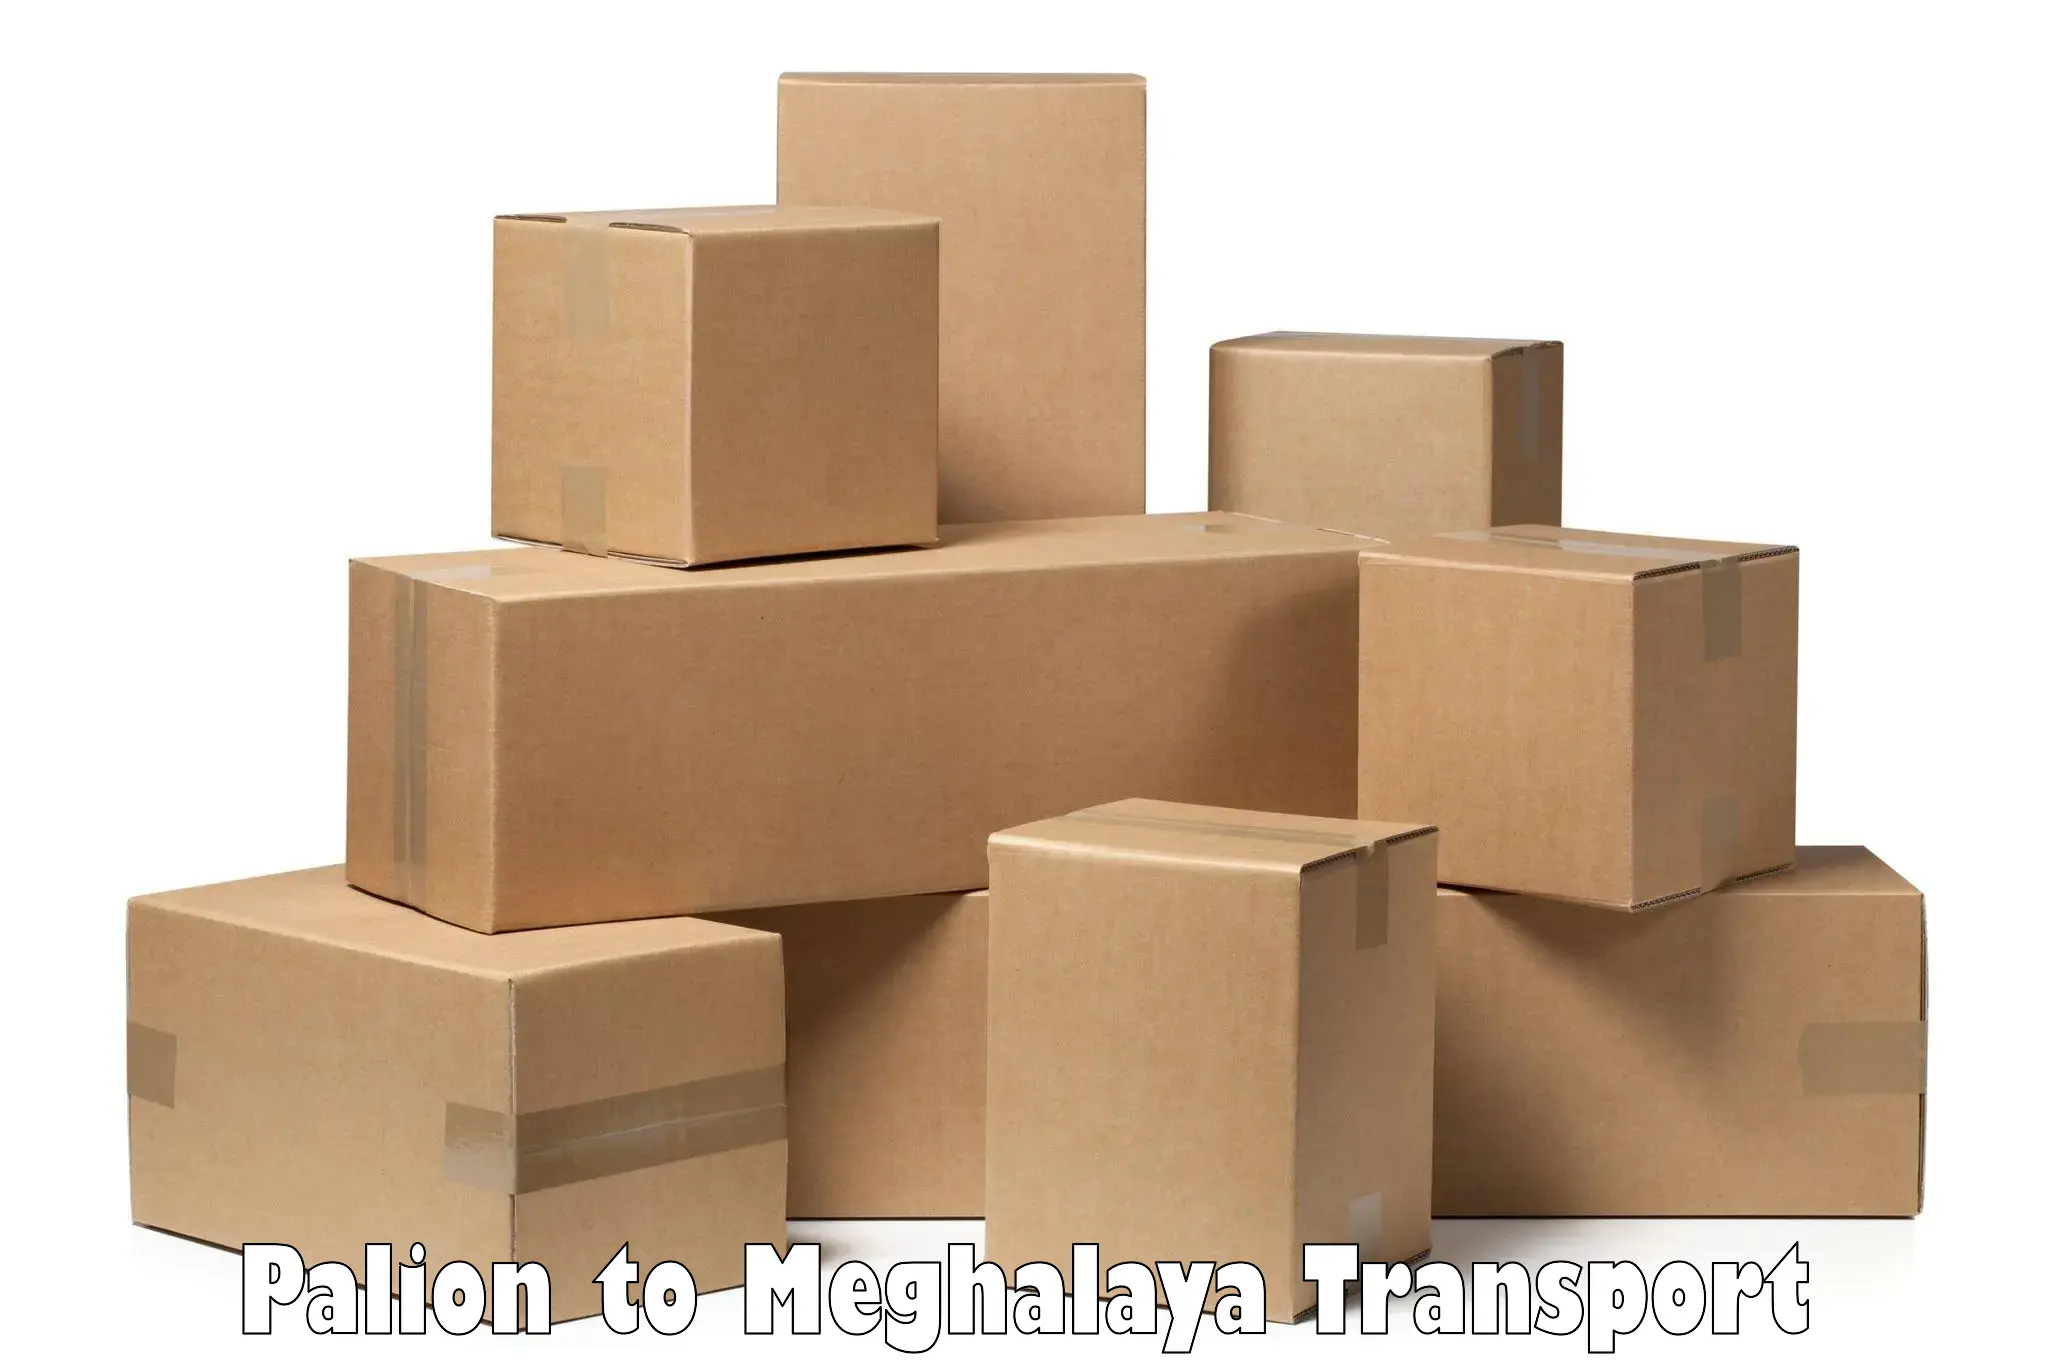 Container transport service Palion to Meghalaya